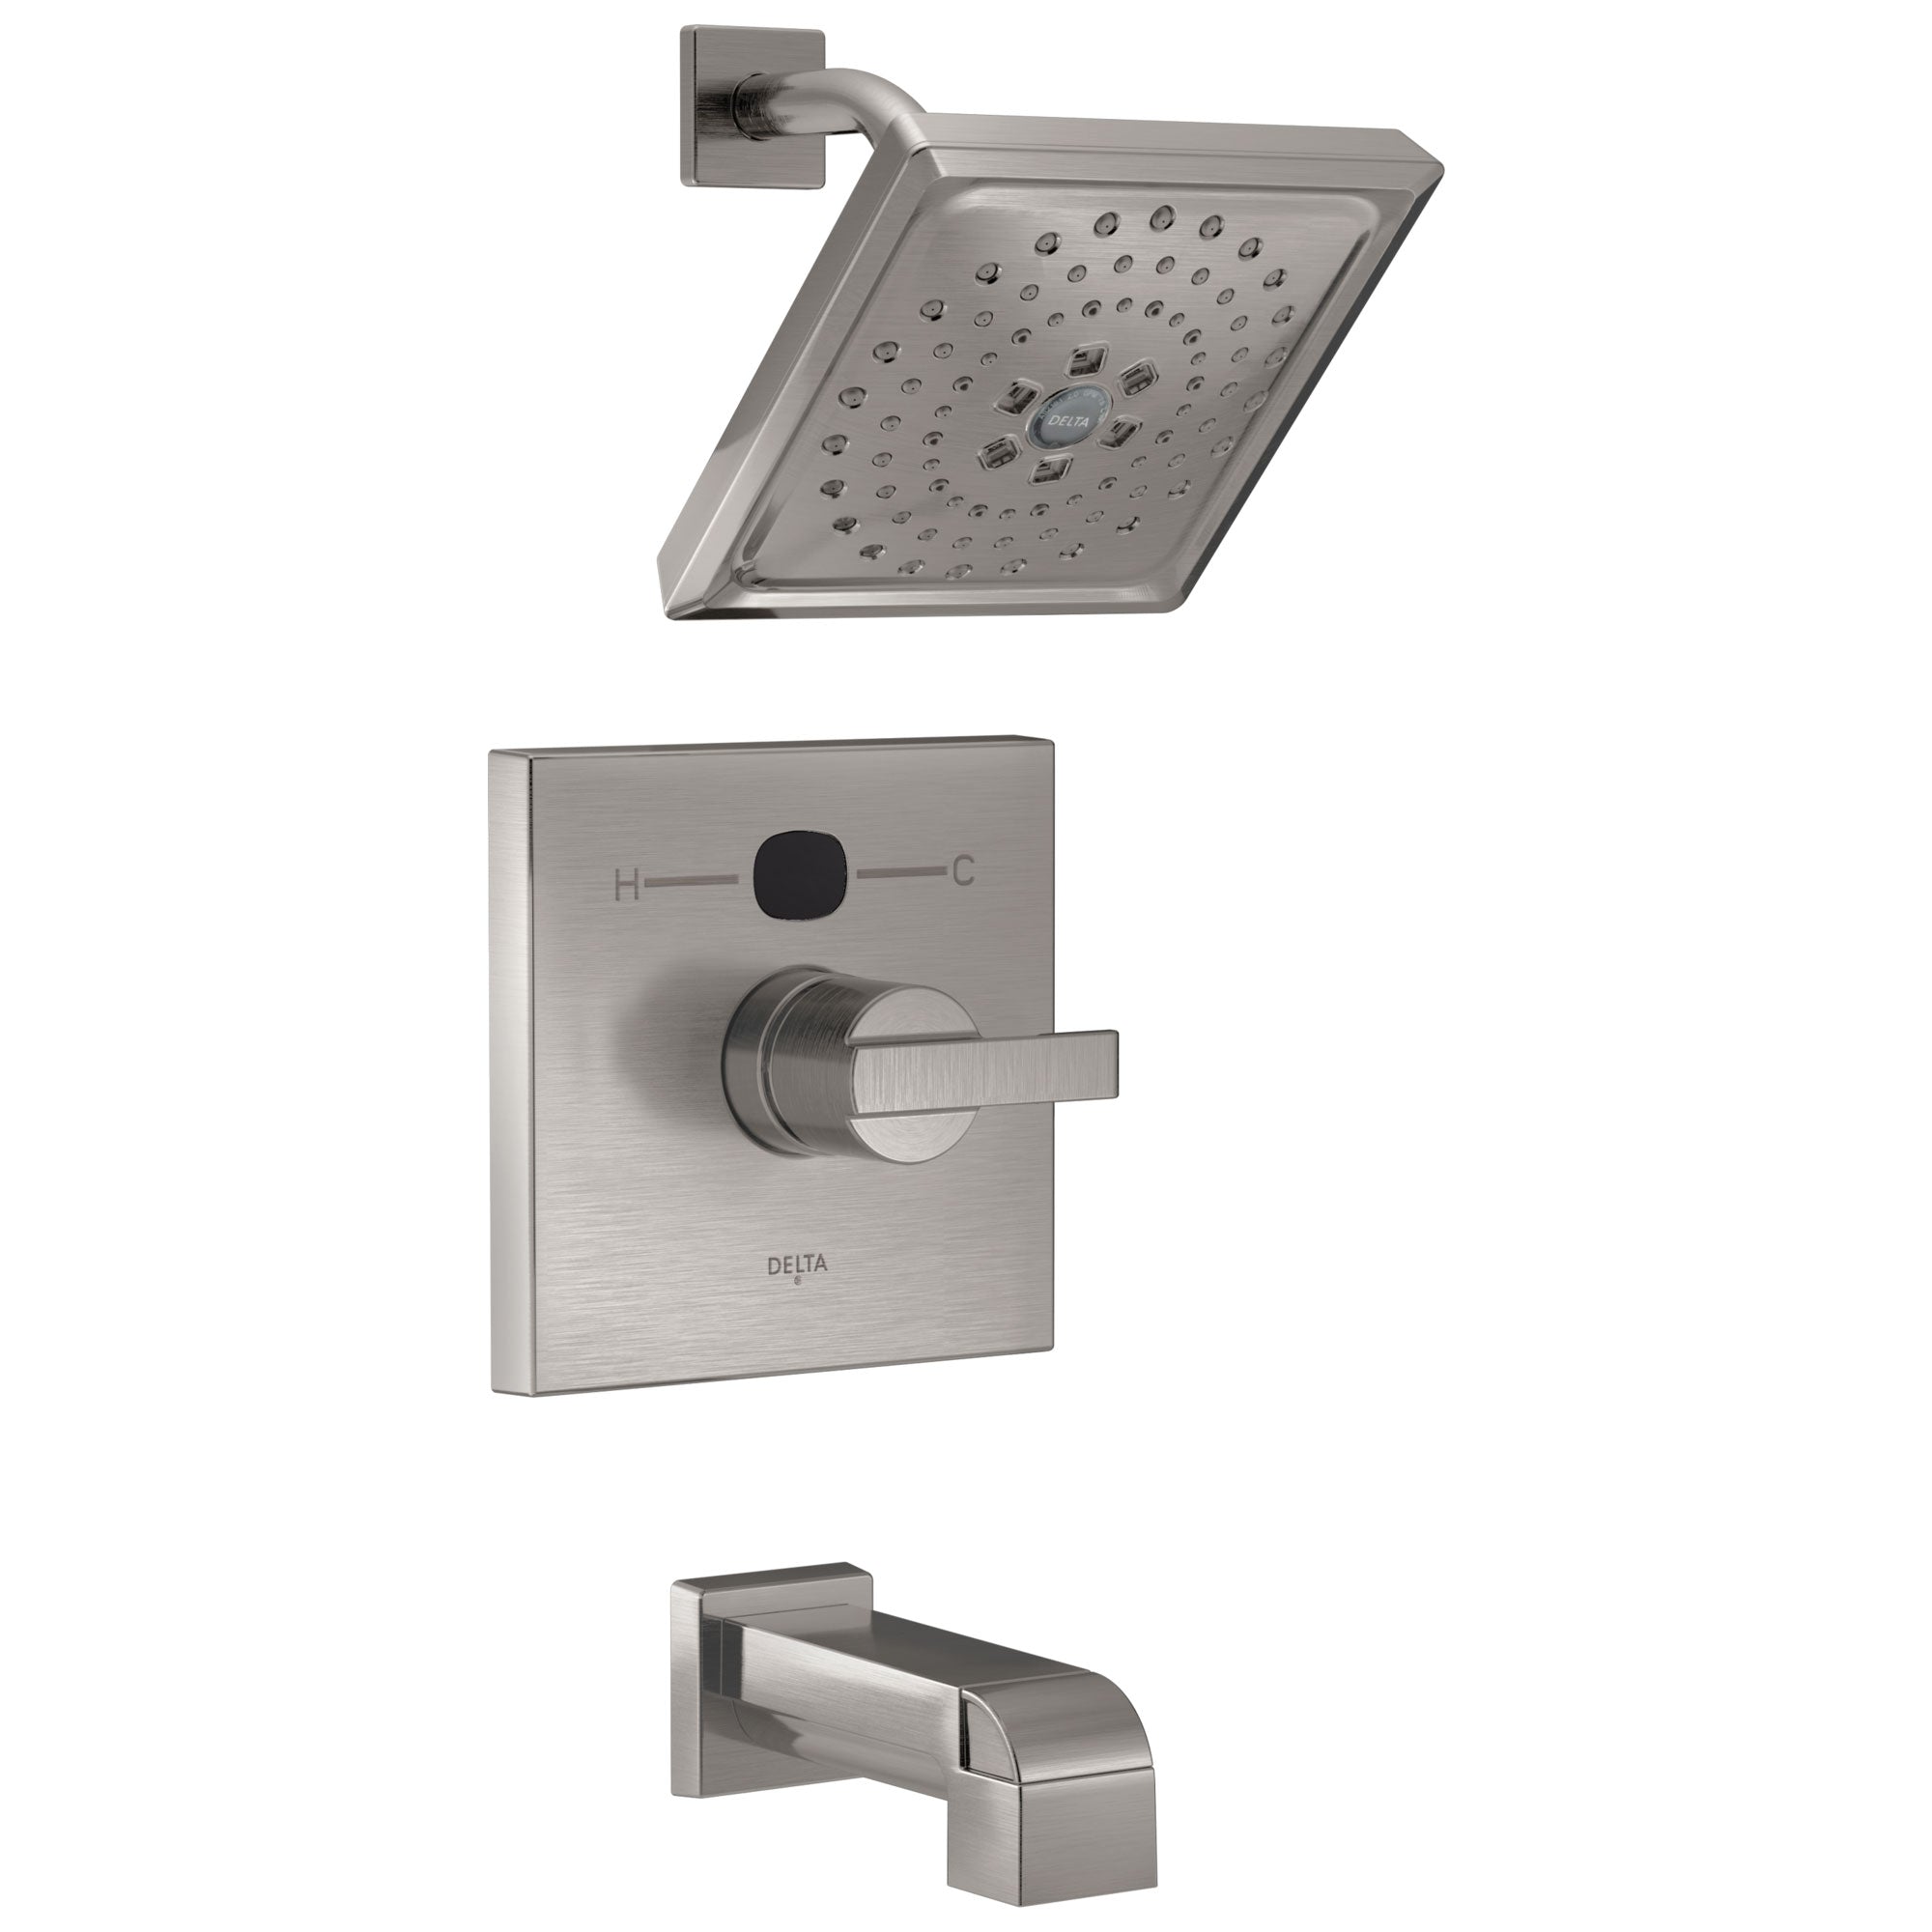 Delta Stainless Steel Finish Ara Modern 14 Series Digital Display Temp2O One Handle Tub and Shower Combination Faucet Includes Valve without Stops D2008V